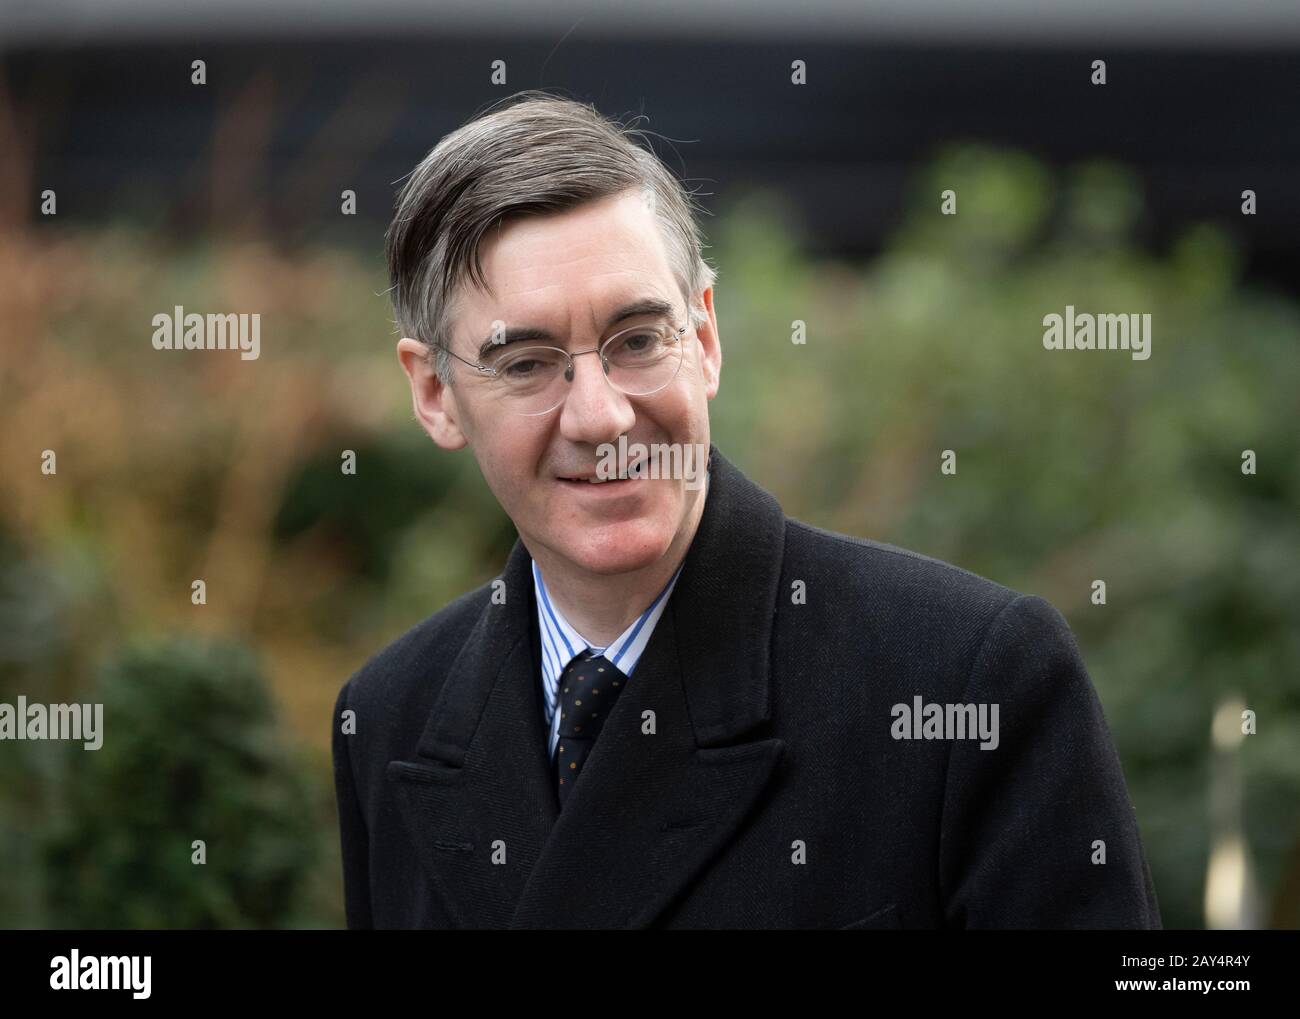 Downing Street, London, UK. 14th February 2020. Jacob Rees-Mogg MP, Leader of the Commons in Downing Street for weekly cabinet meeting. Credit: Malcolm Park/Alamy Live News. Stock Photo